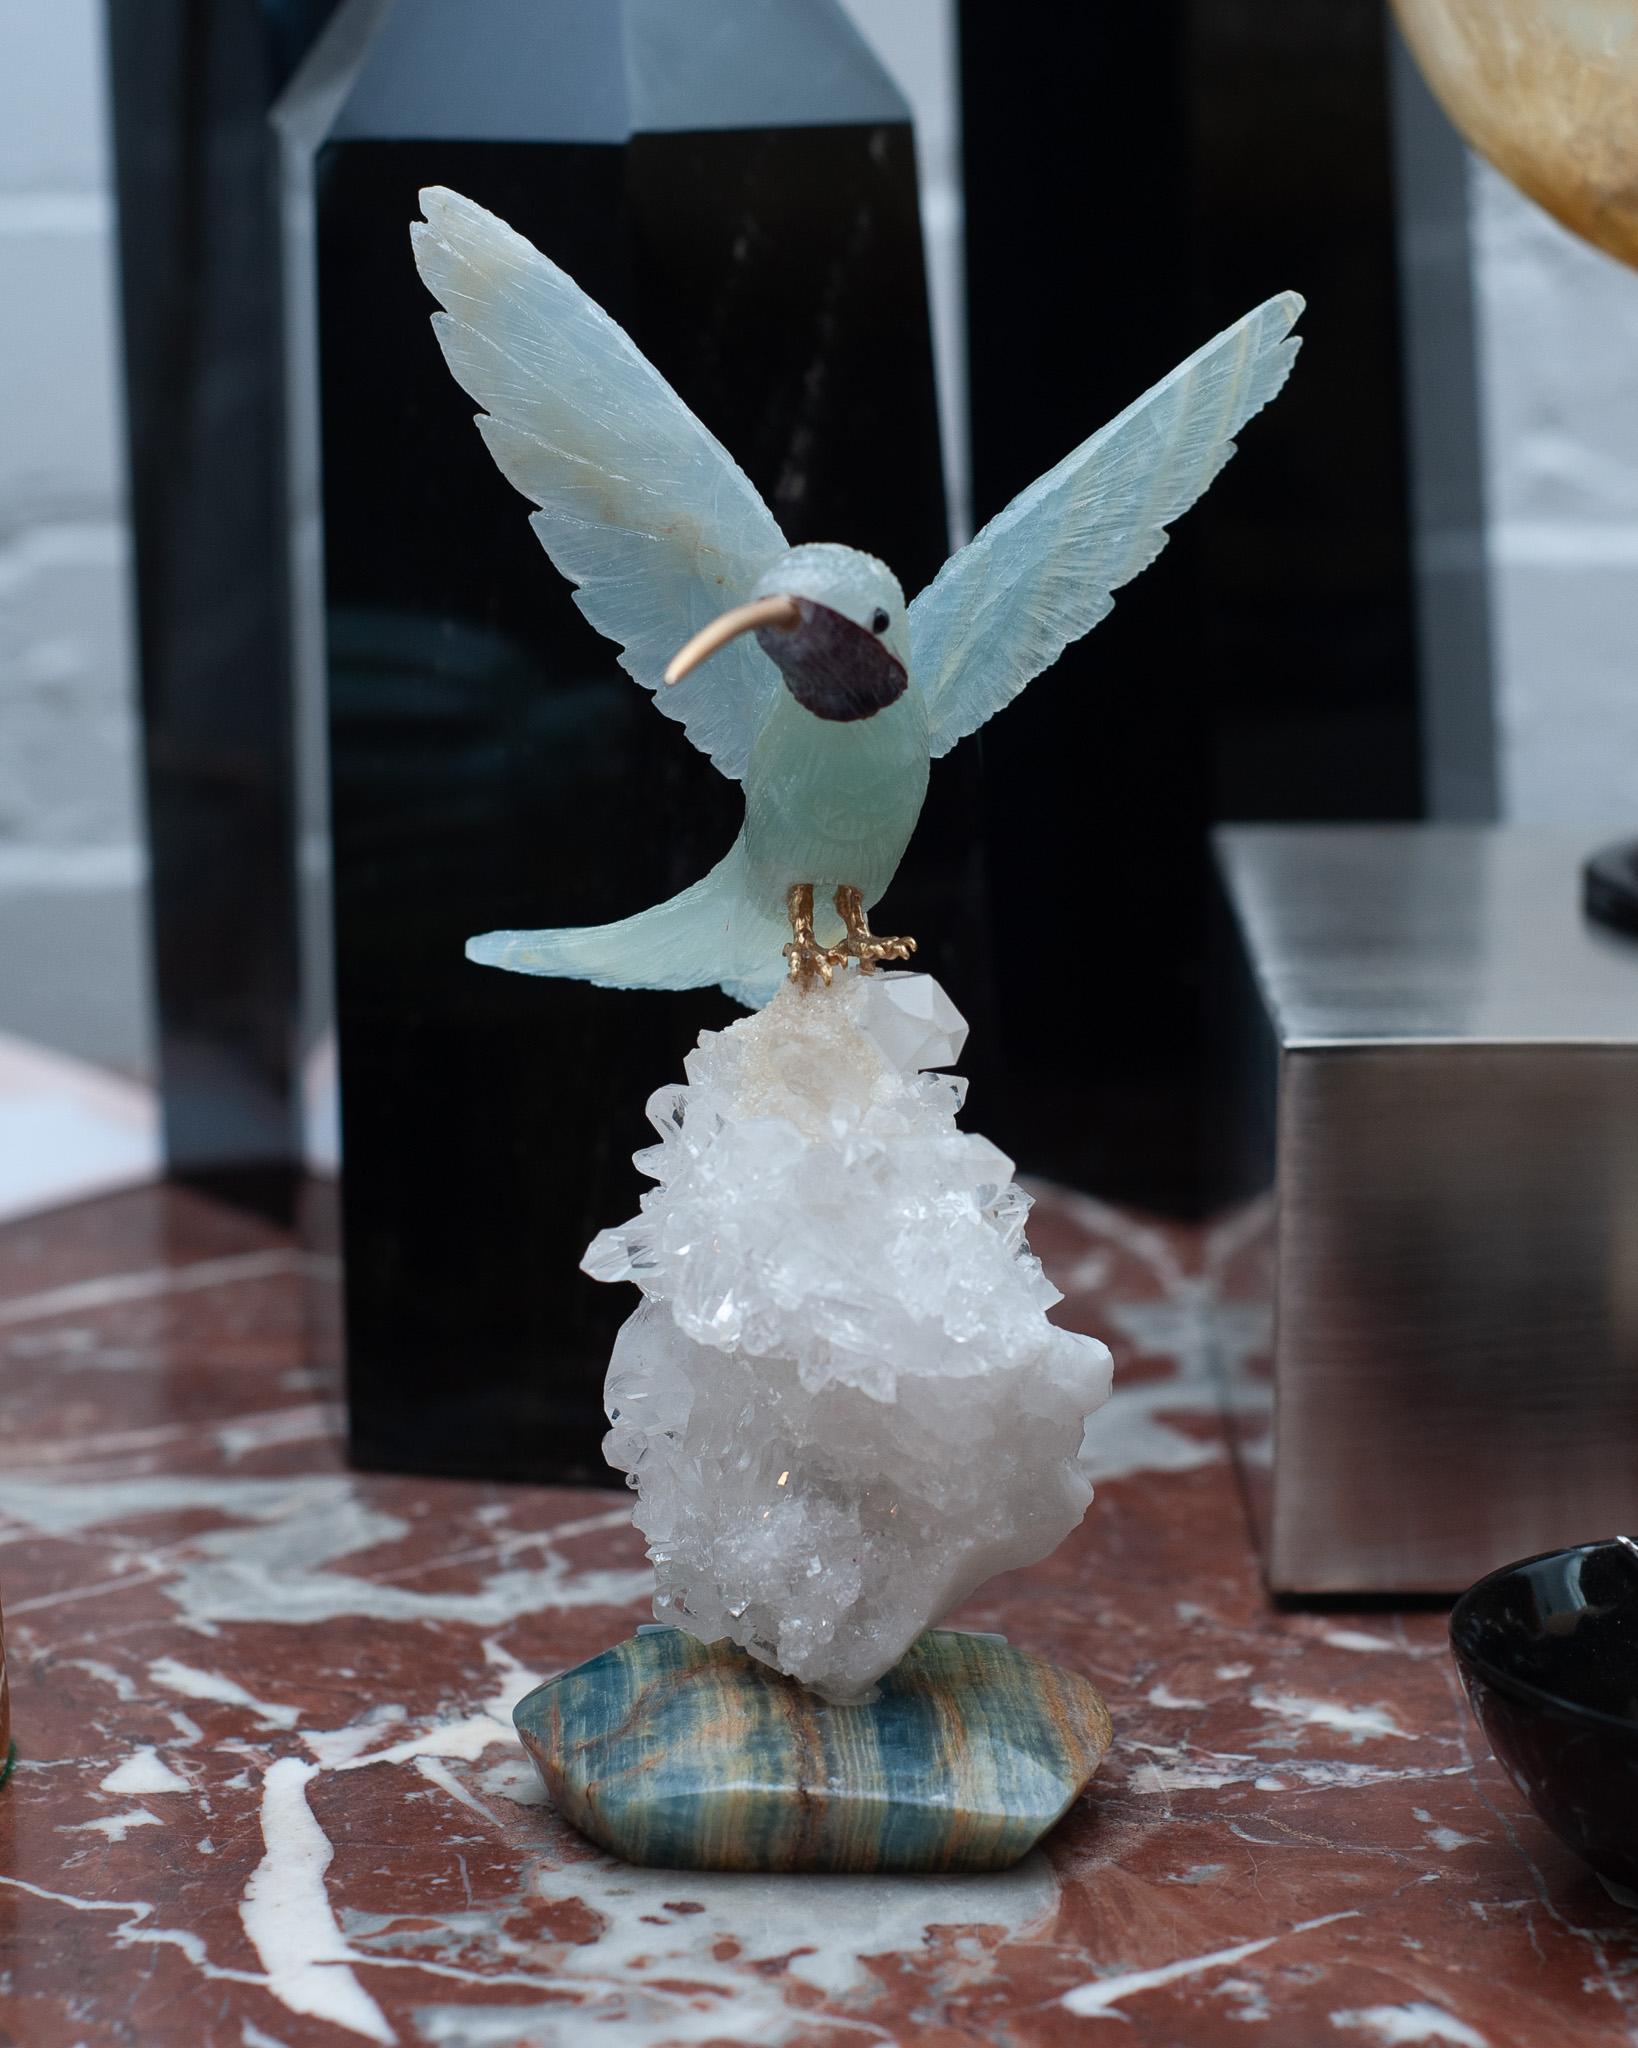 A beautiful hand carved semi precious aquamarine stone hummingbird sculpture with brass beak and legs, mounted on a rock crystal quartz and blue onyx mineral specimen base. This exotic bird is a decorative combination of ornithology and geology.